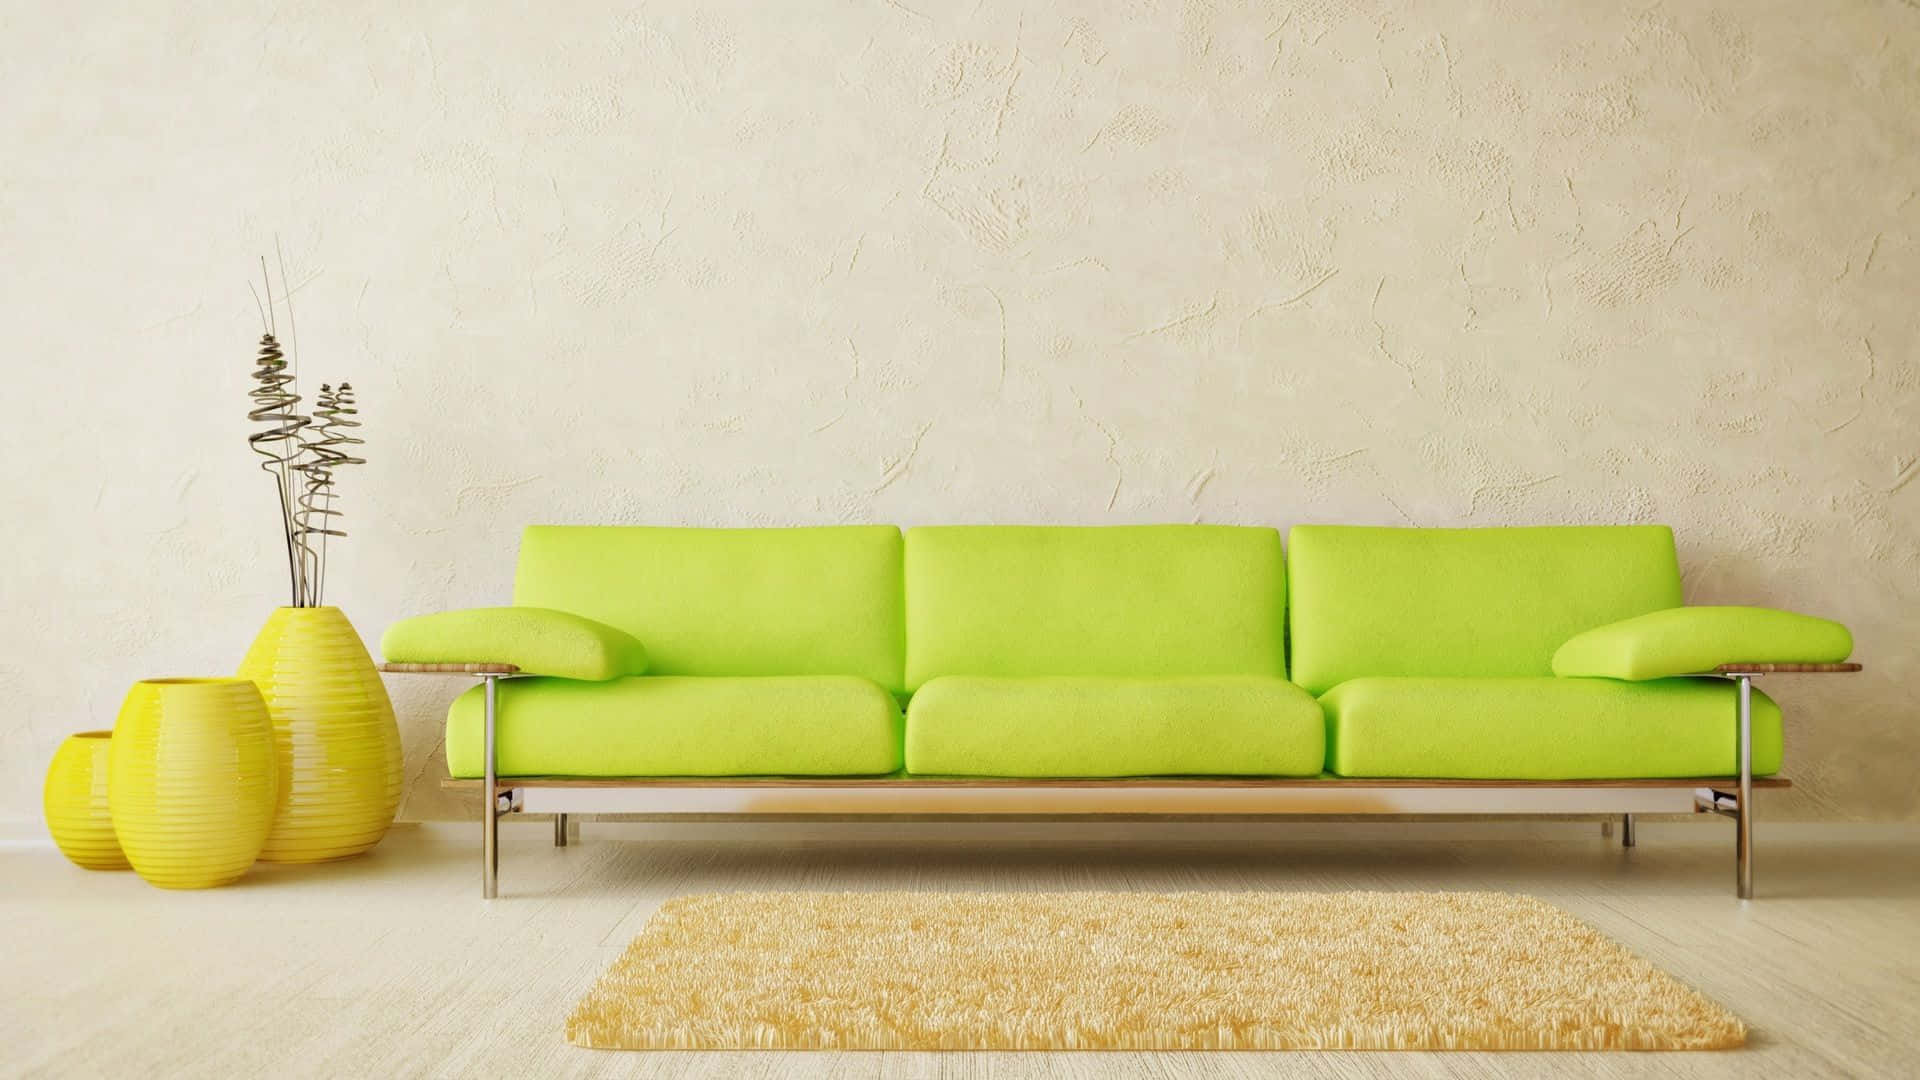 A Bright Green Couch